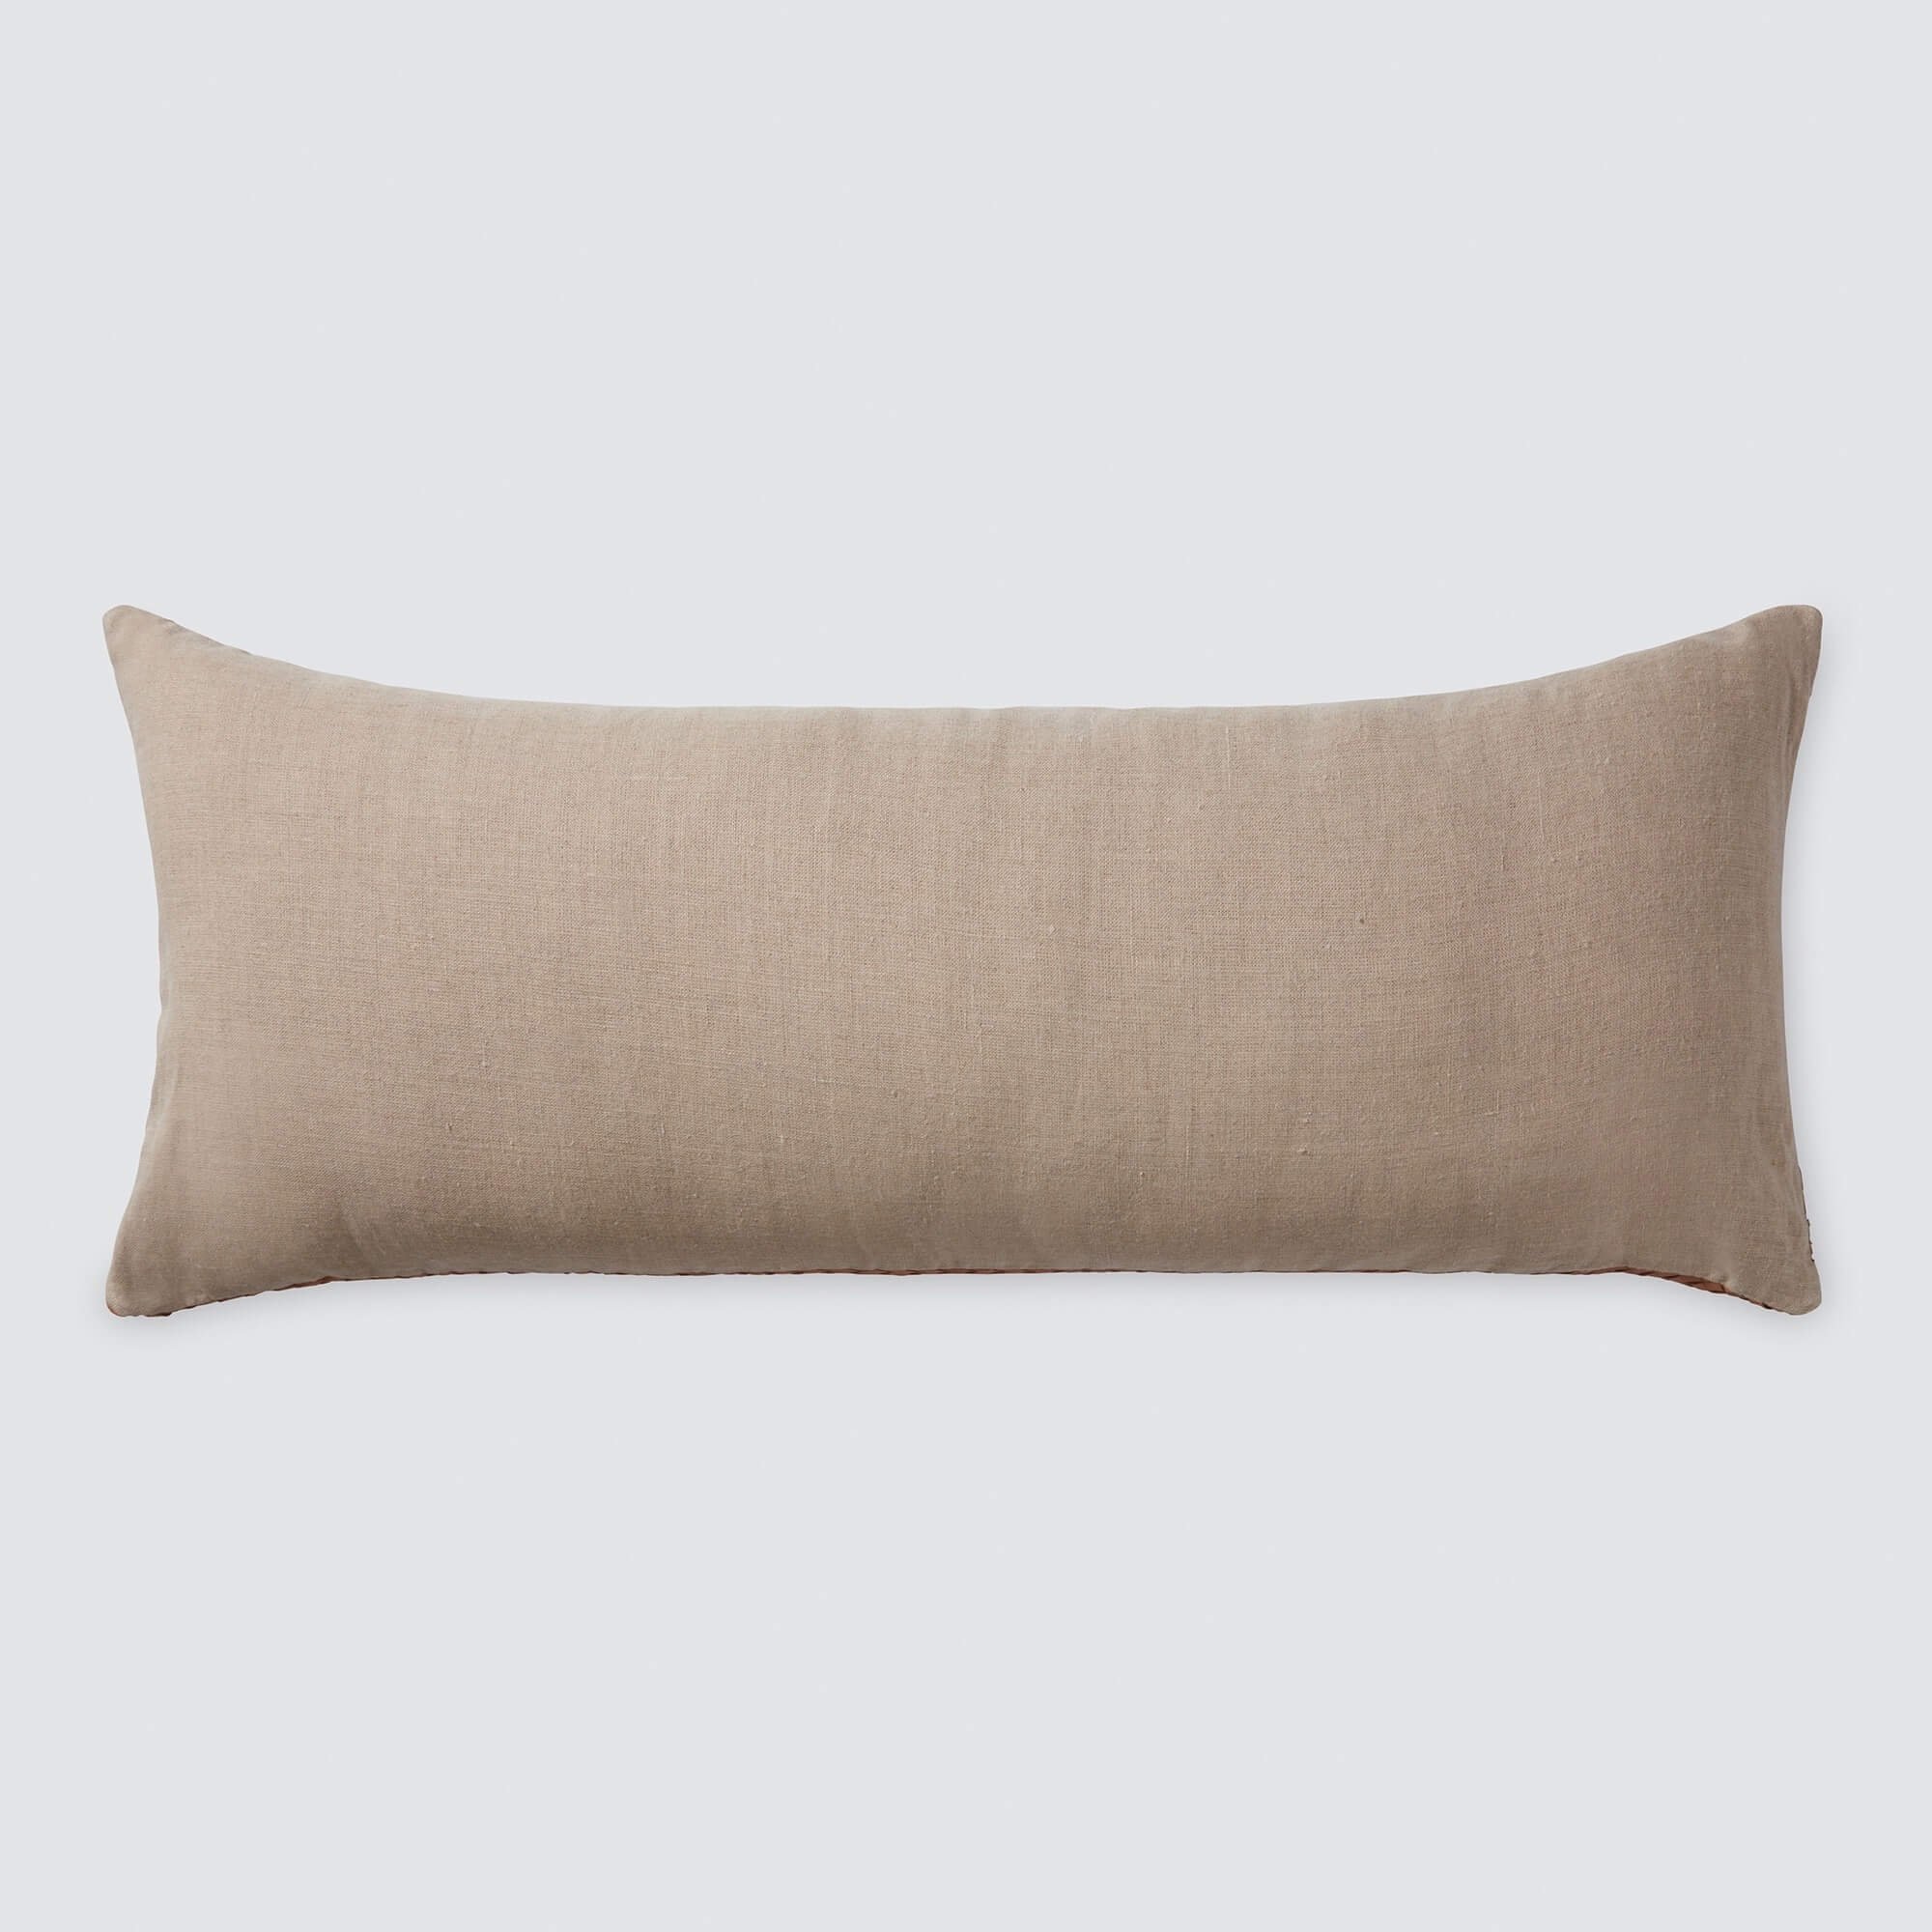 The Citizenry Dhara Leather Lumbar Pillow | 12" x 30" | Natural - Image 9